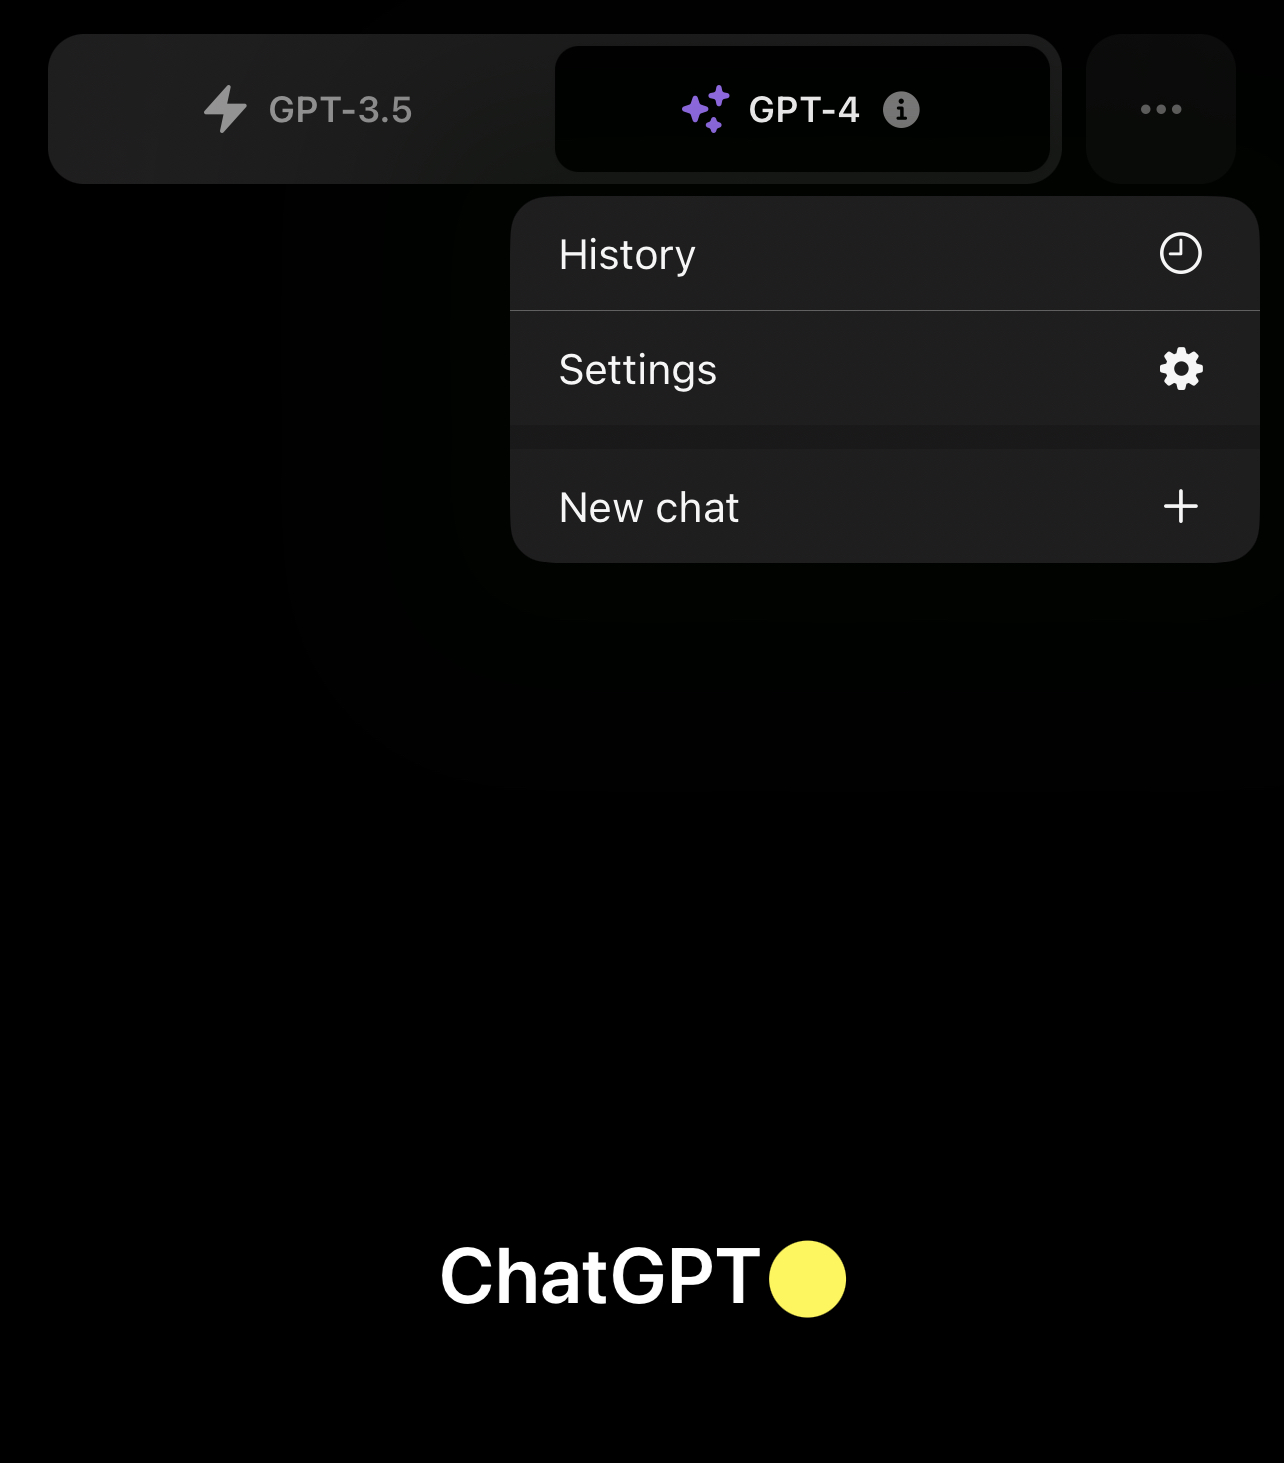 official openai chatgpt app ios iphone 11 6466733264b05 sej - A Look Inside The New ChatGPT iPhone App From OpenAI